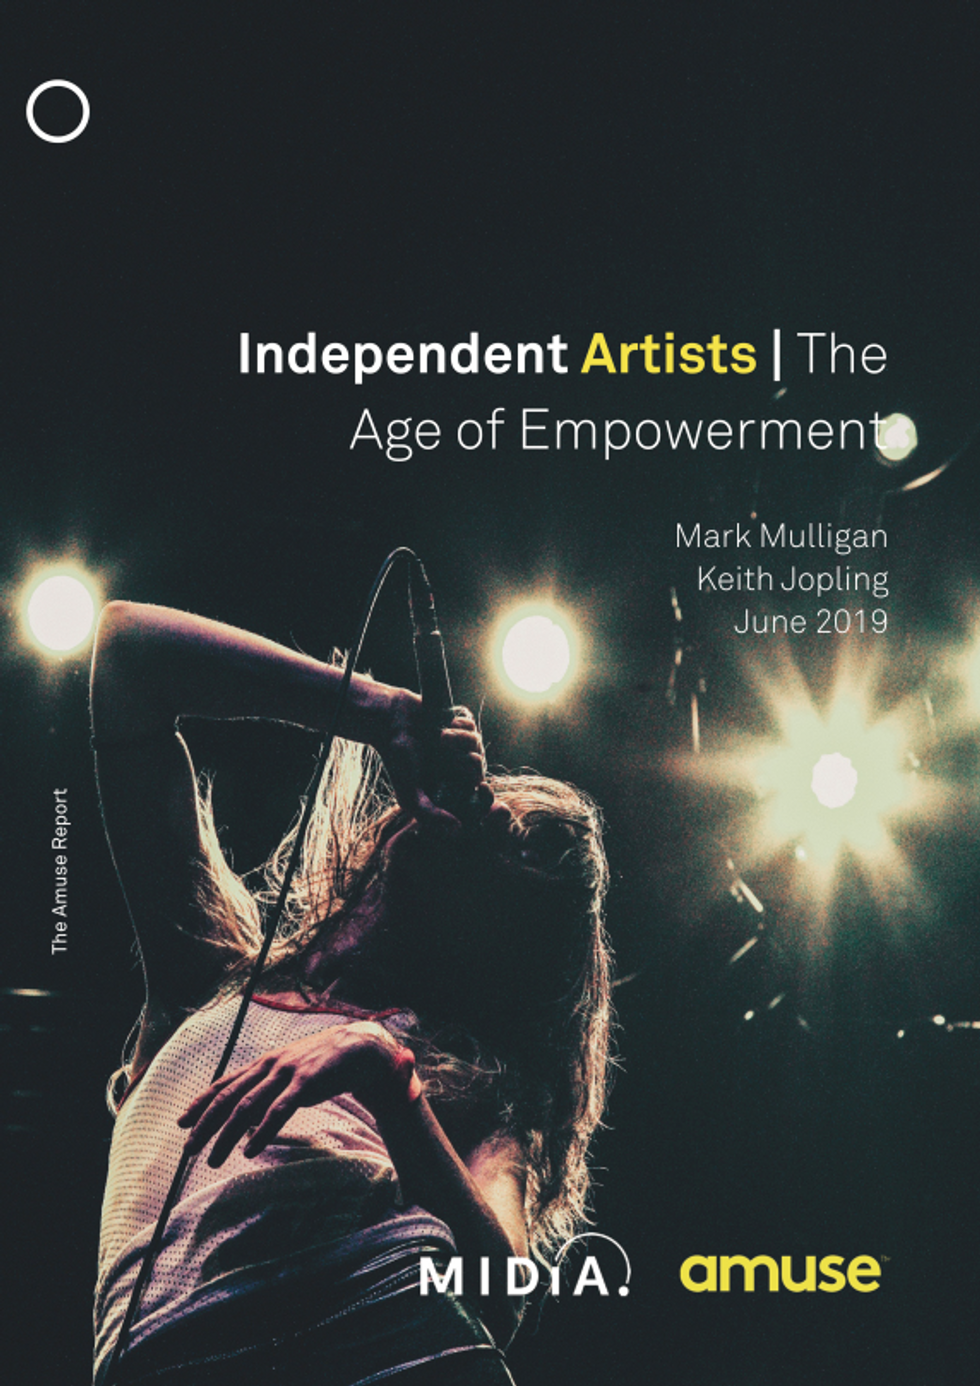 Independent Artists: The Age of Empowerment